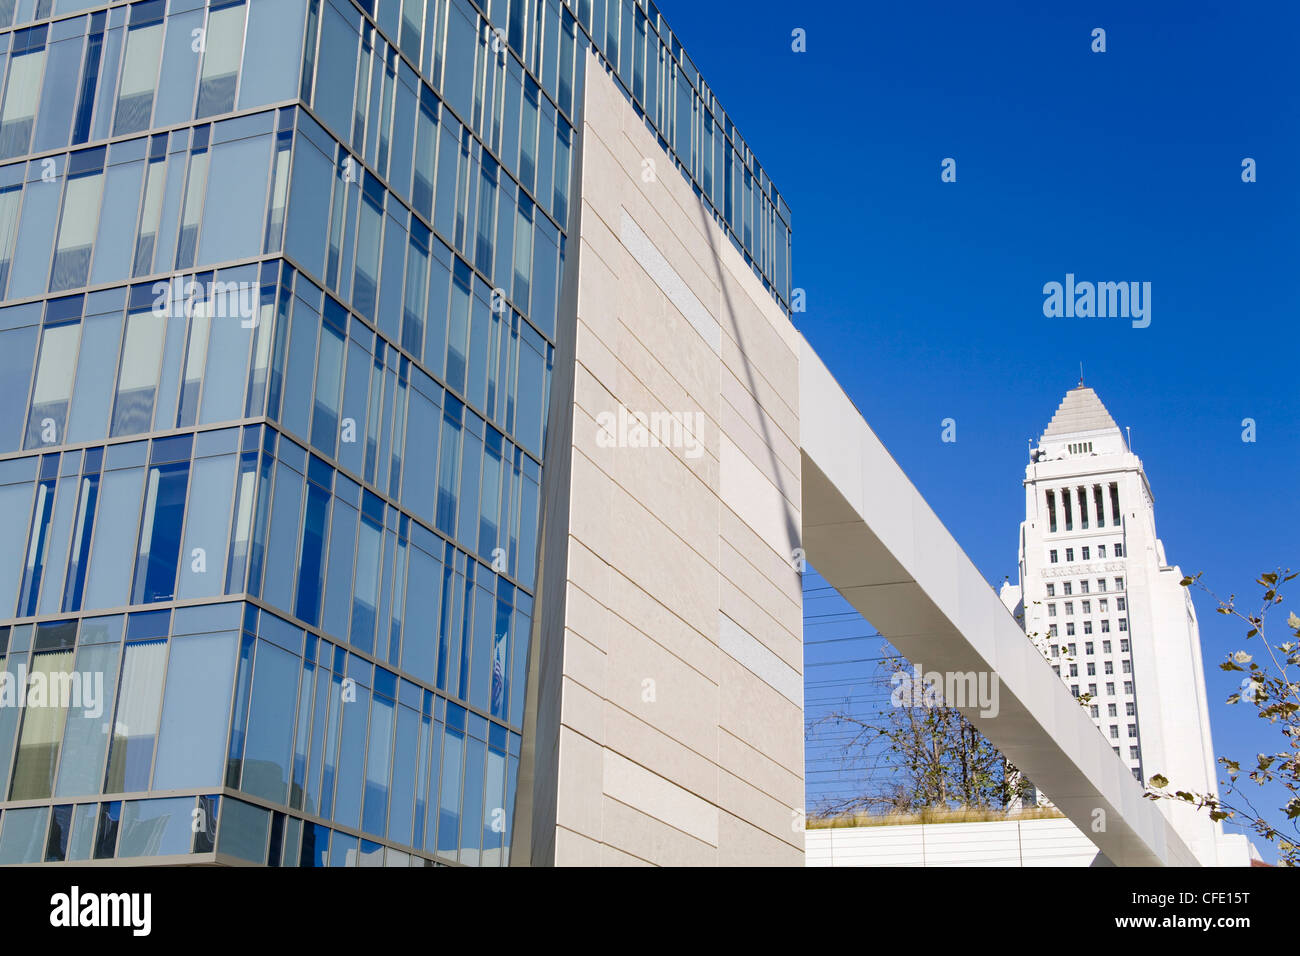 Los Angeles Police Department,City Hall, Los Angeles, California, United States of America, Stock Photo